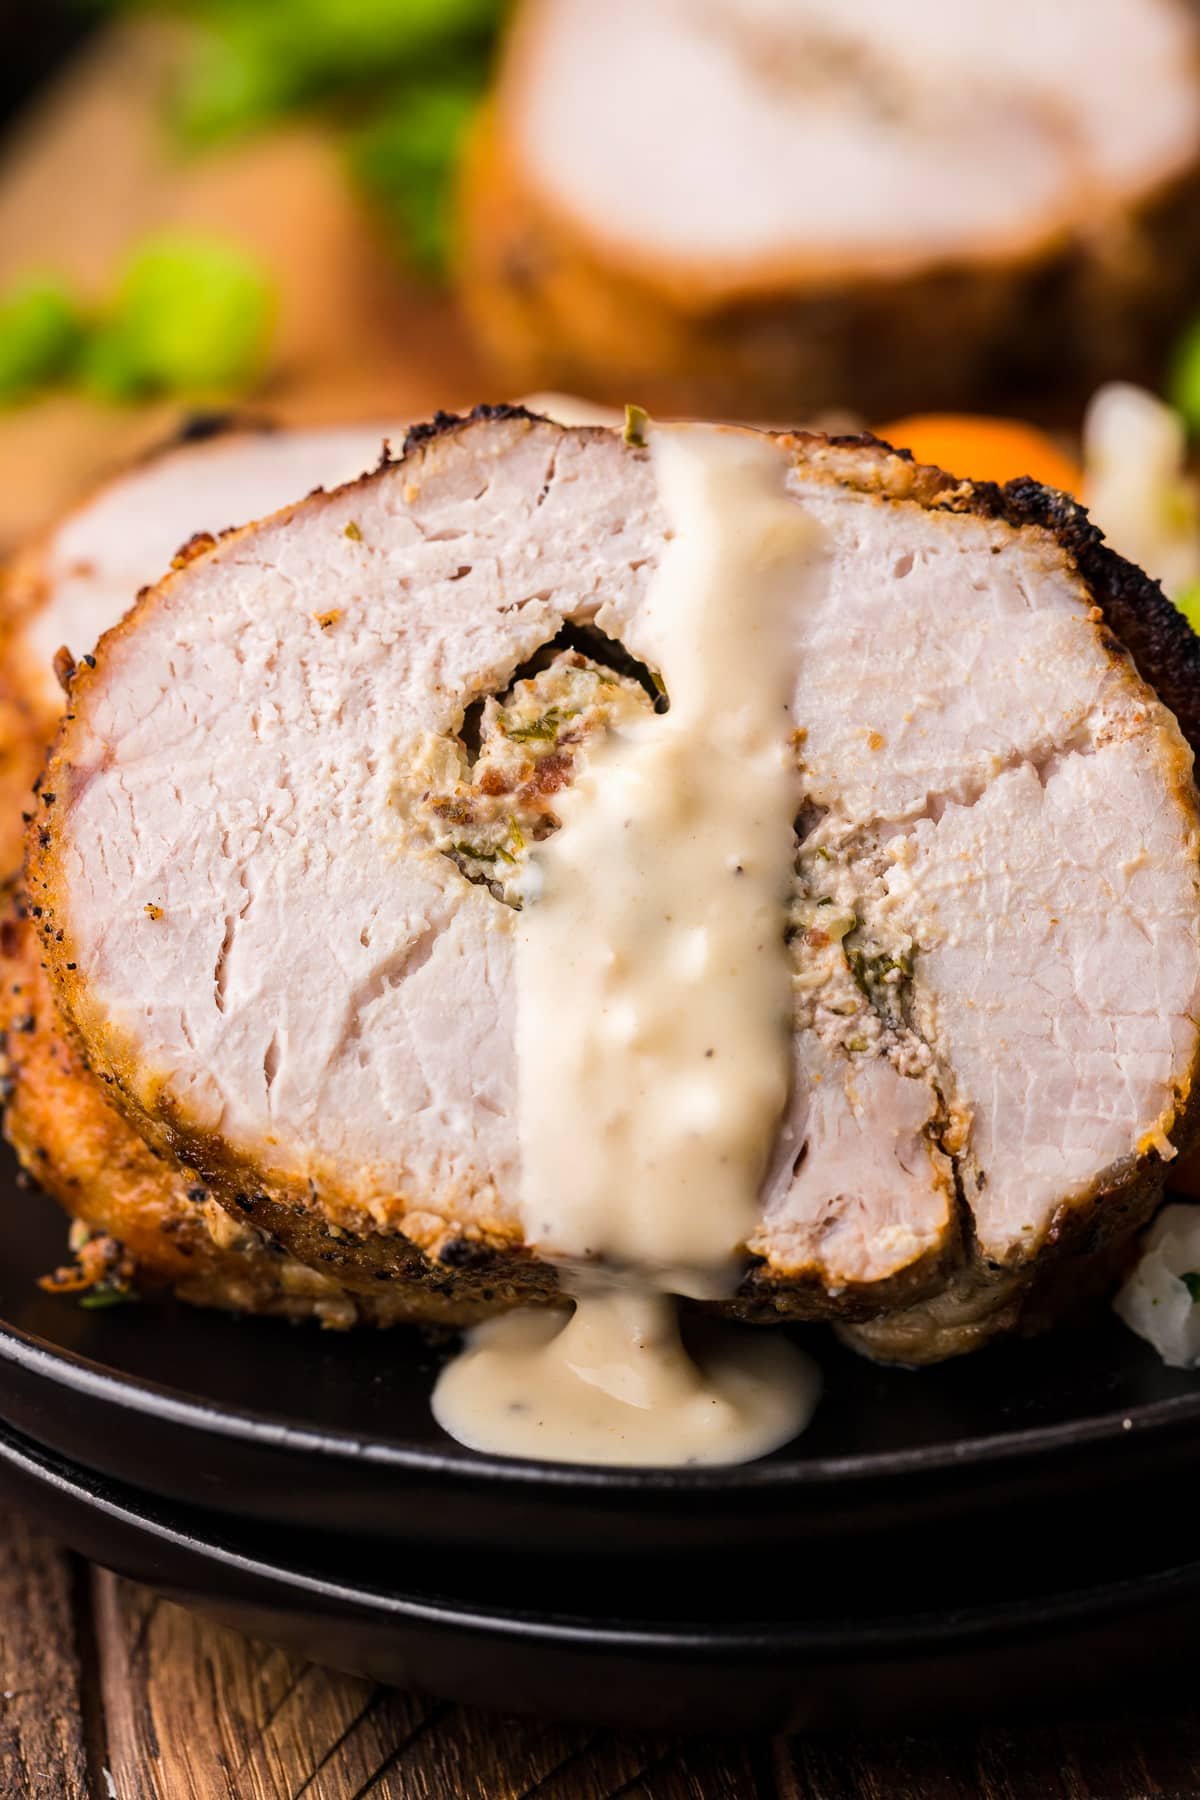 Sliced and plated Stuffed Pork Loin with sauce drizzled over.